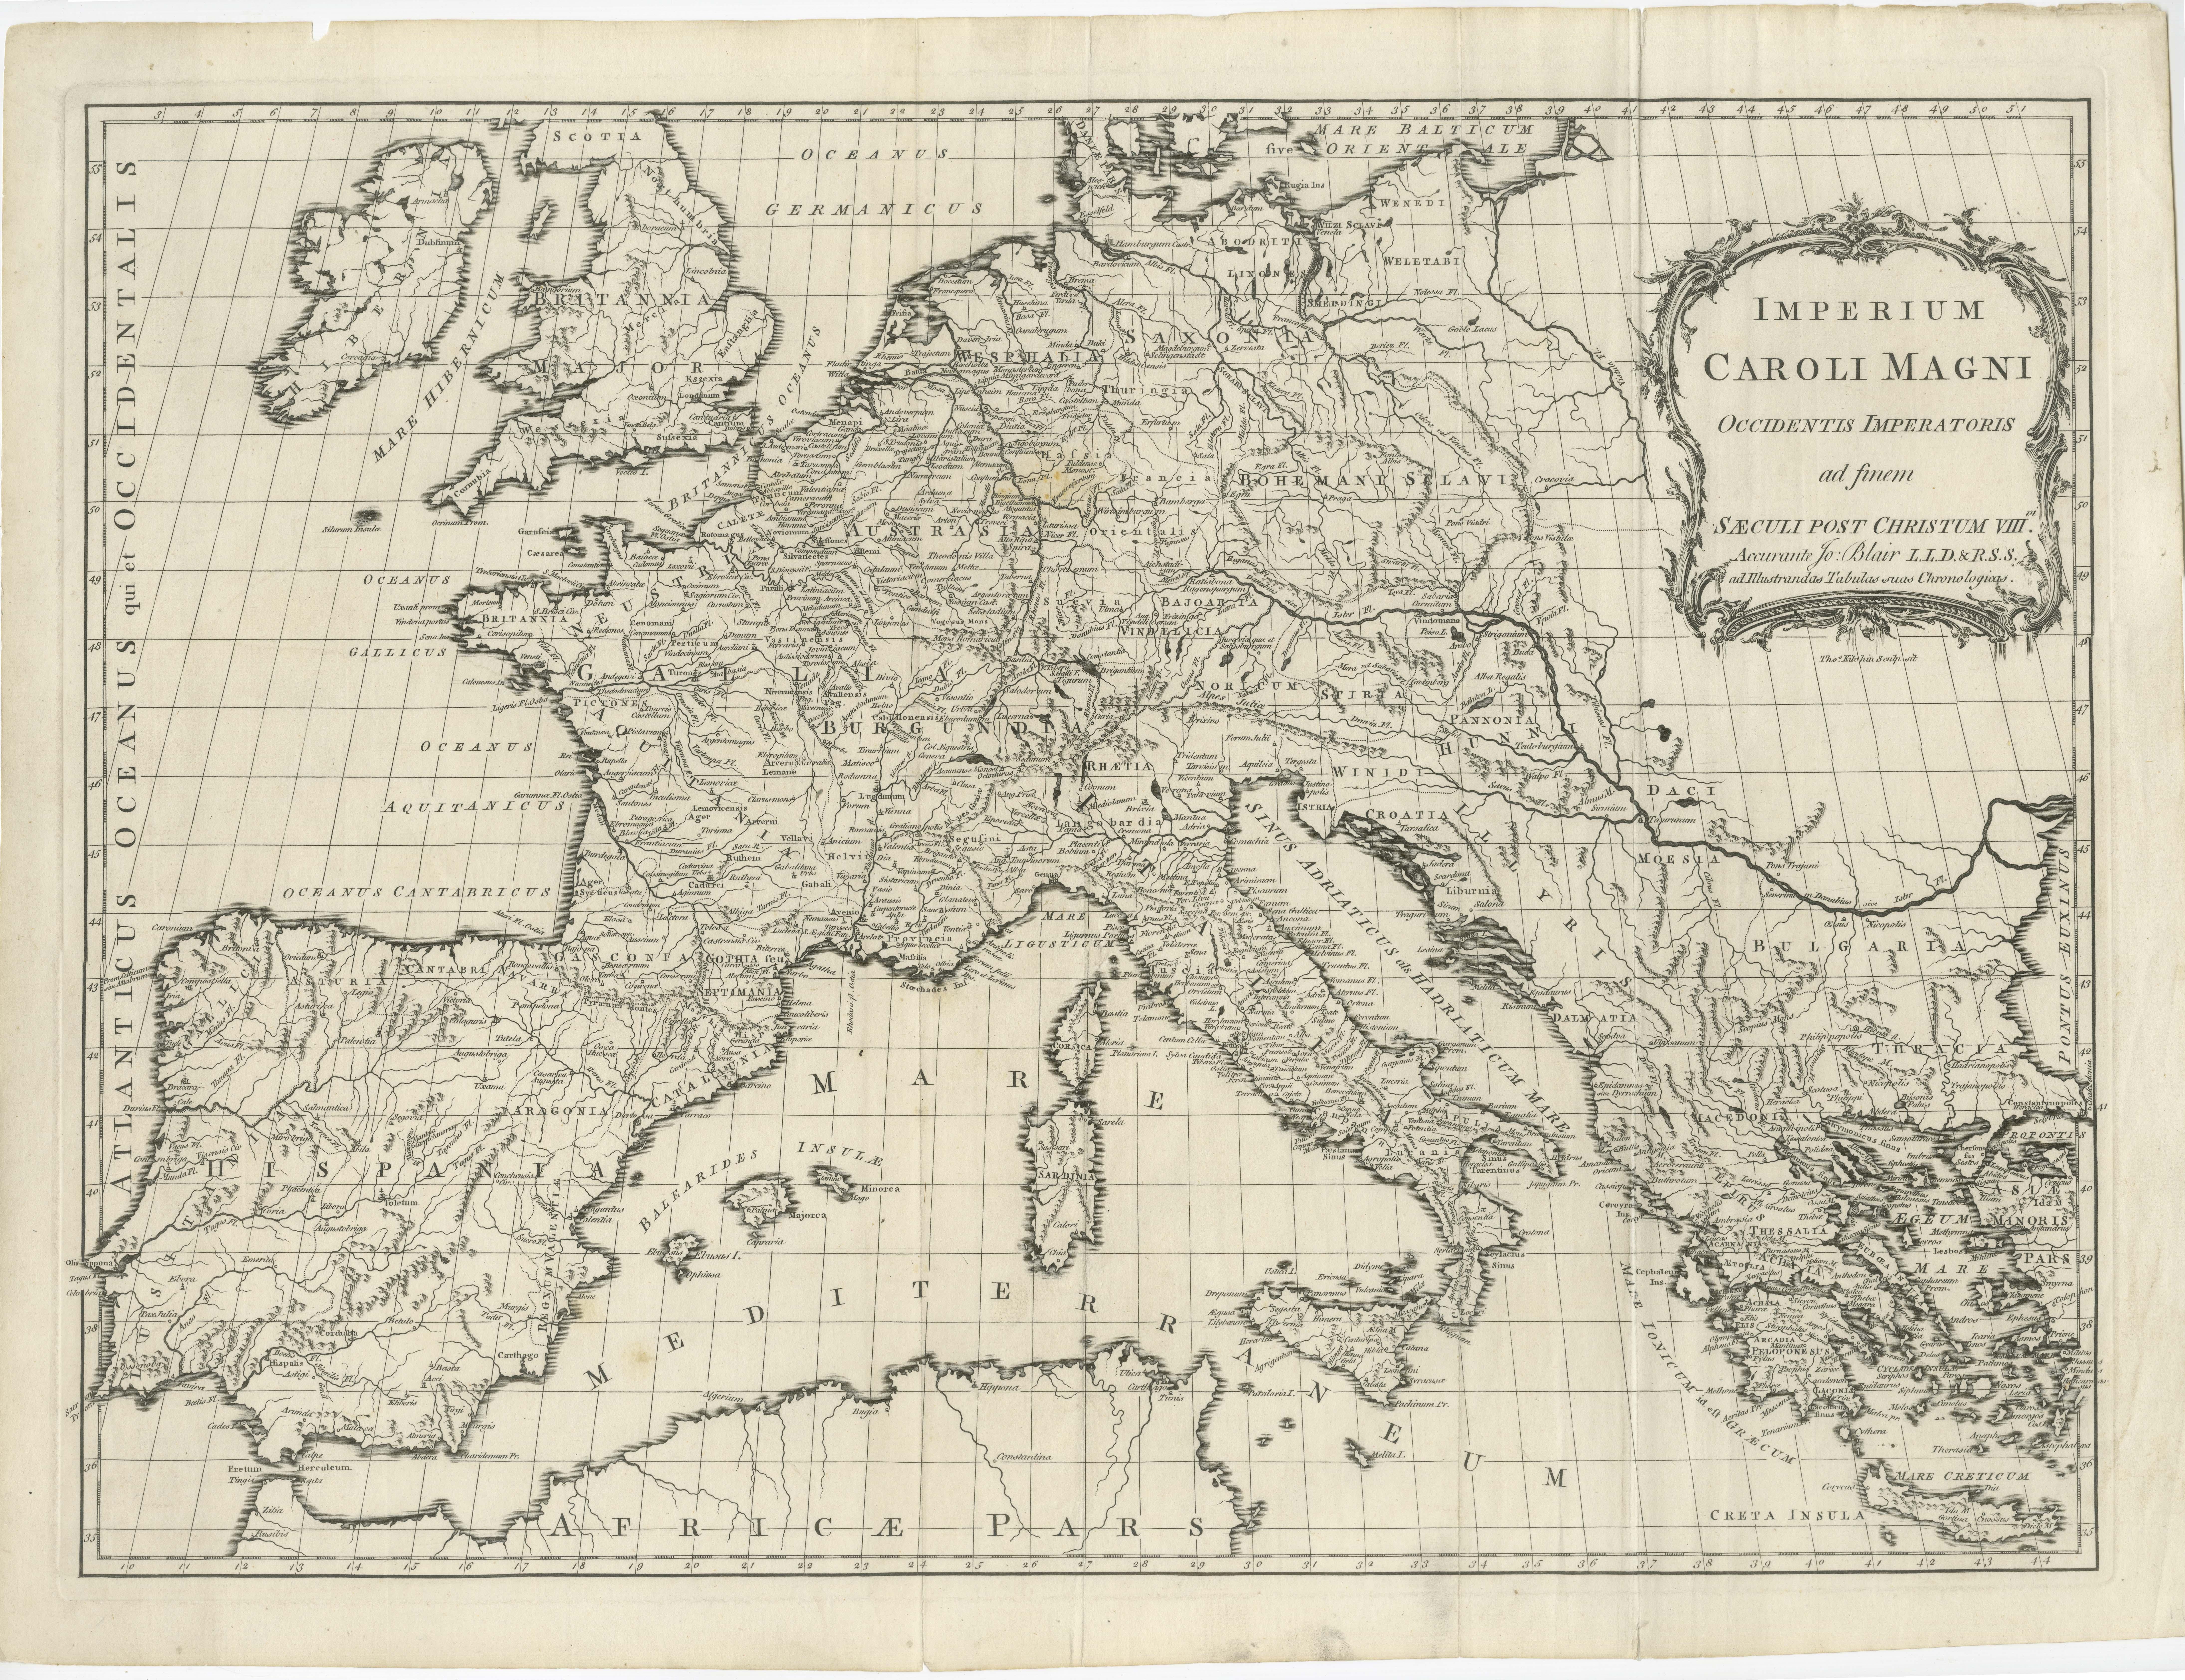 Antique map titled 'Imperium Caroli Magni (..)'. Large antique map of Europe, showing the Empire of Charlemagne in the 8th Century. Engraved by T. Kitchin. Published J. Blair, circa 1779.